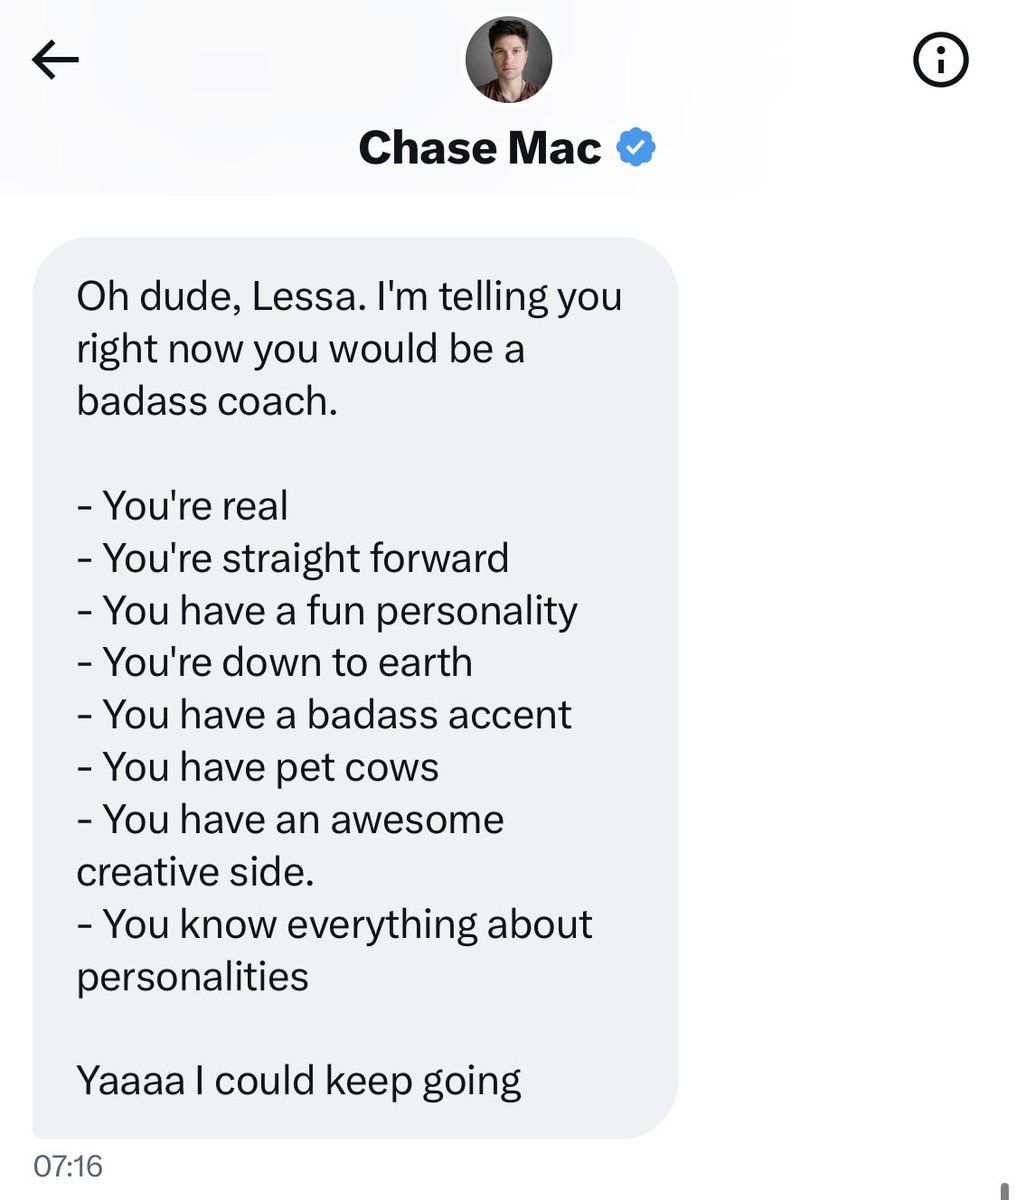 Give it up for Chase the real coach.

(coaching me to be a coach)

Hire him for 10x confidence.